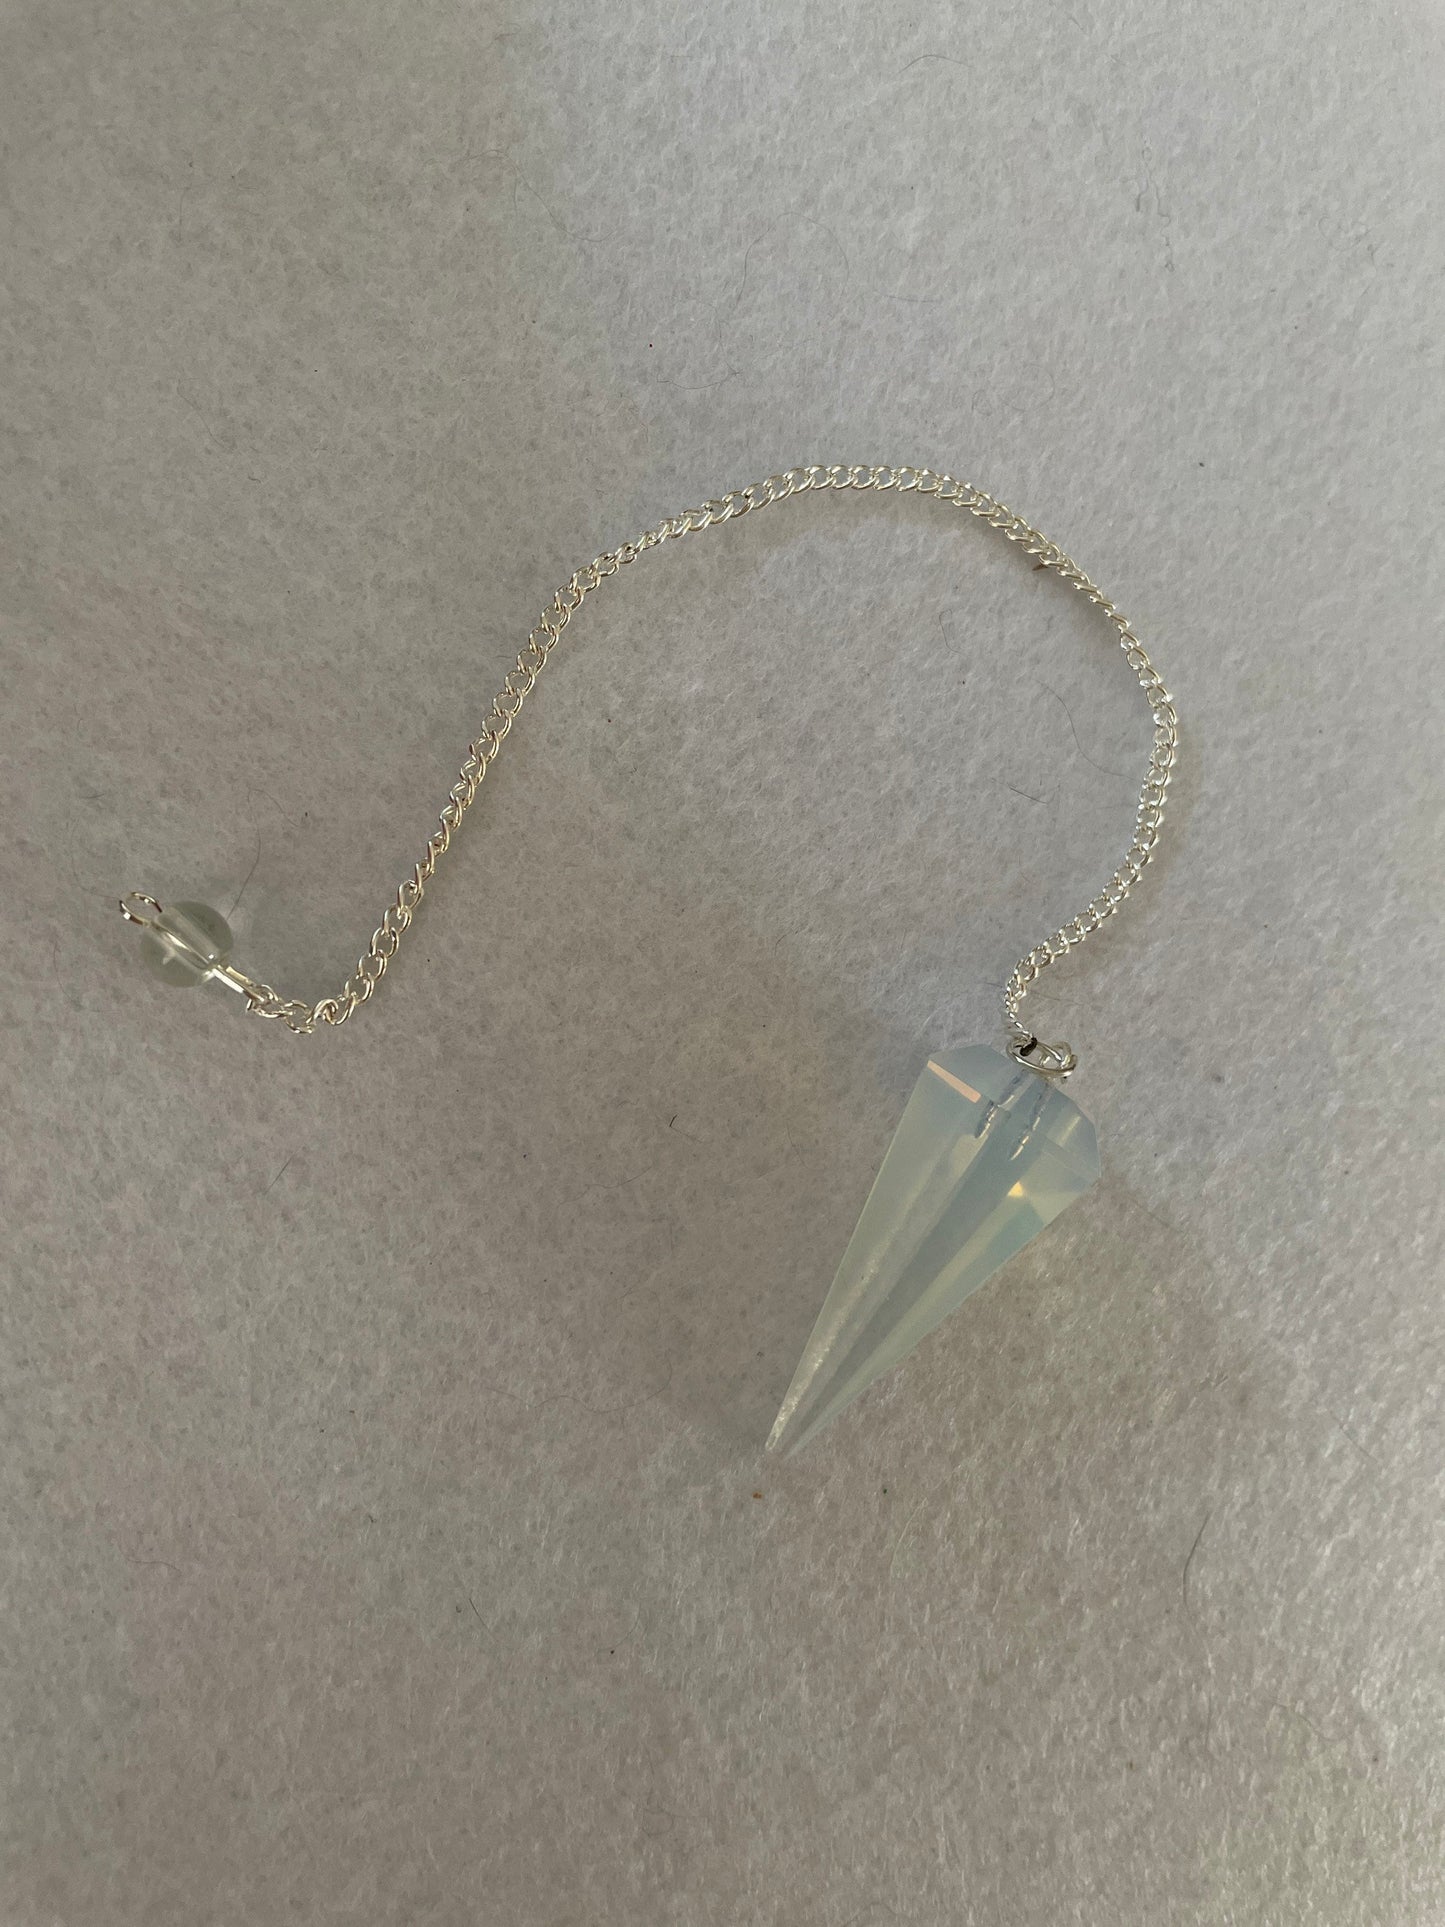 Gorgeous Opalite pendulum is approximately 1.65” and with chain is 8.5” total length